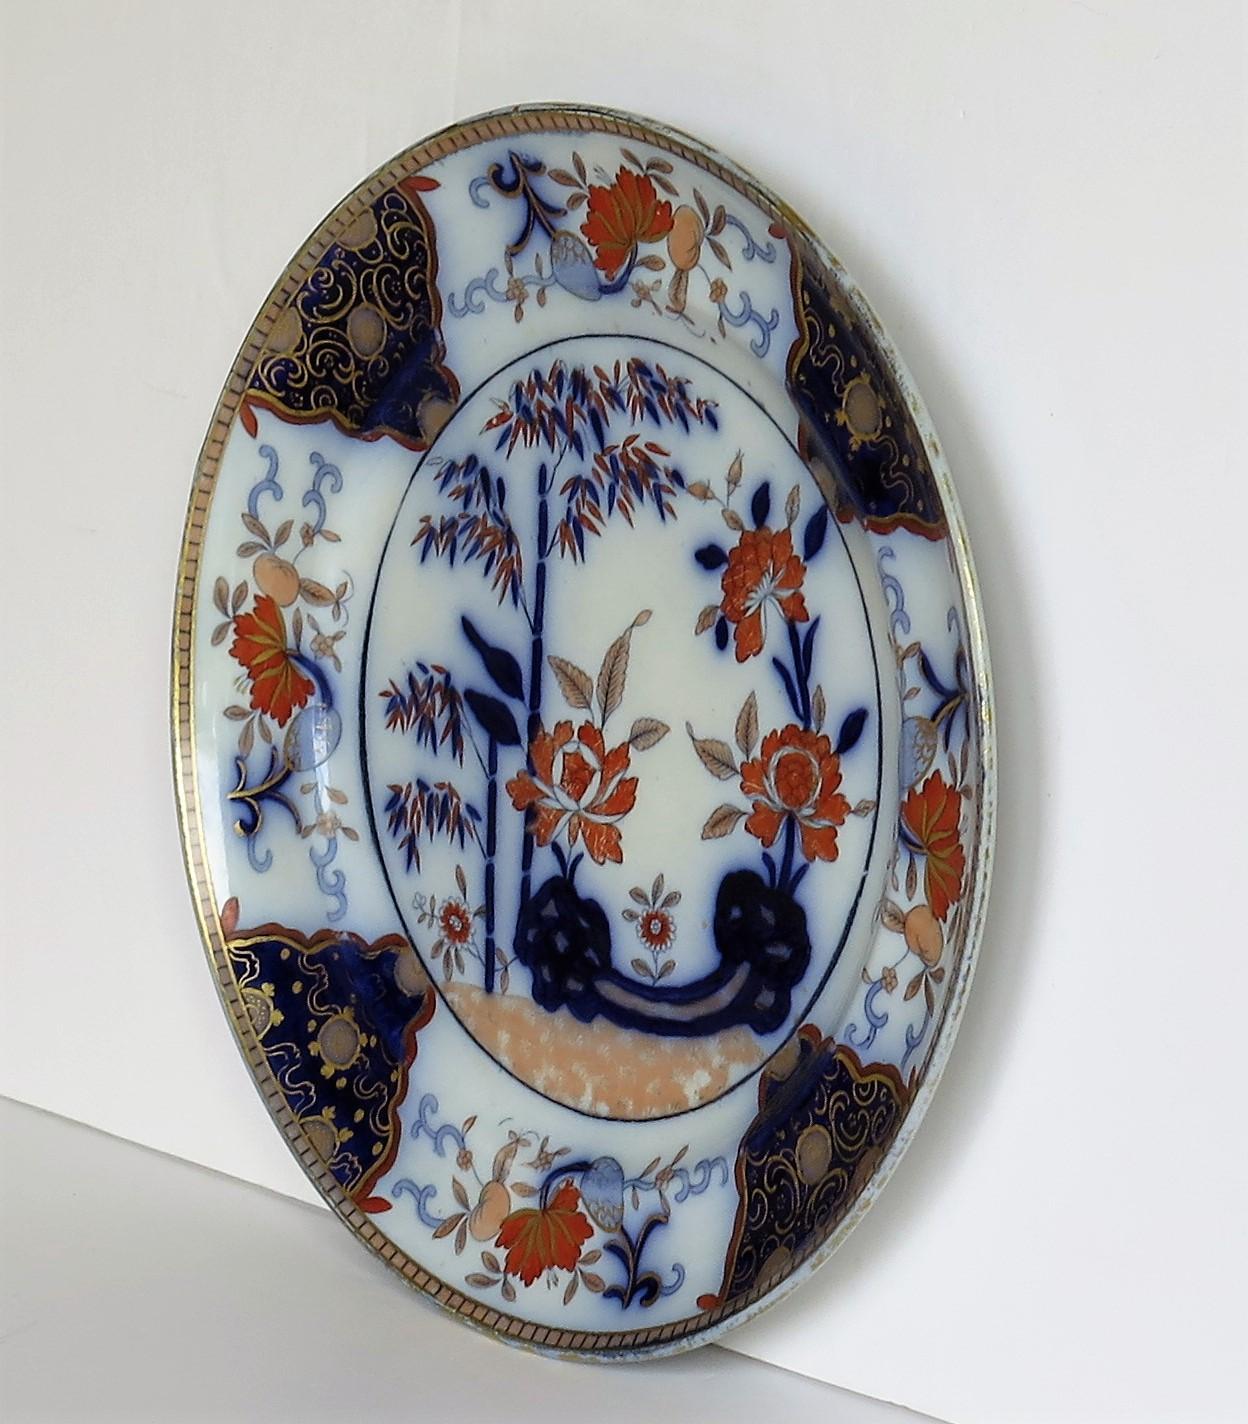 This a good large dinner plate made by William Davenport & Co., Longport, Staffordshire Potteries, England, circa 1810-1820.

The plate is hand painted over a printed outline in a bold Chinoiserie pattern No. 136. The design highlights a bamboo